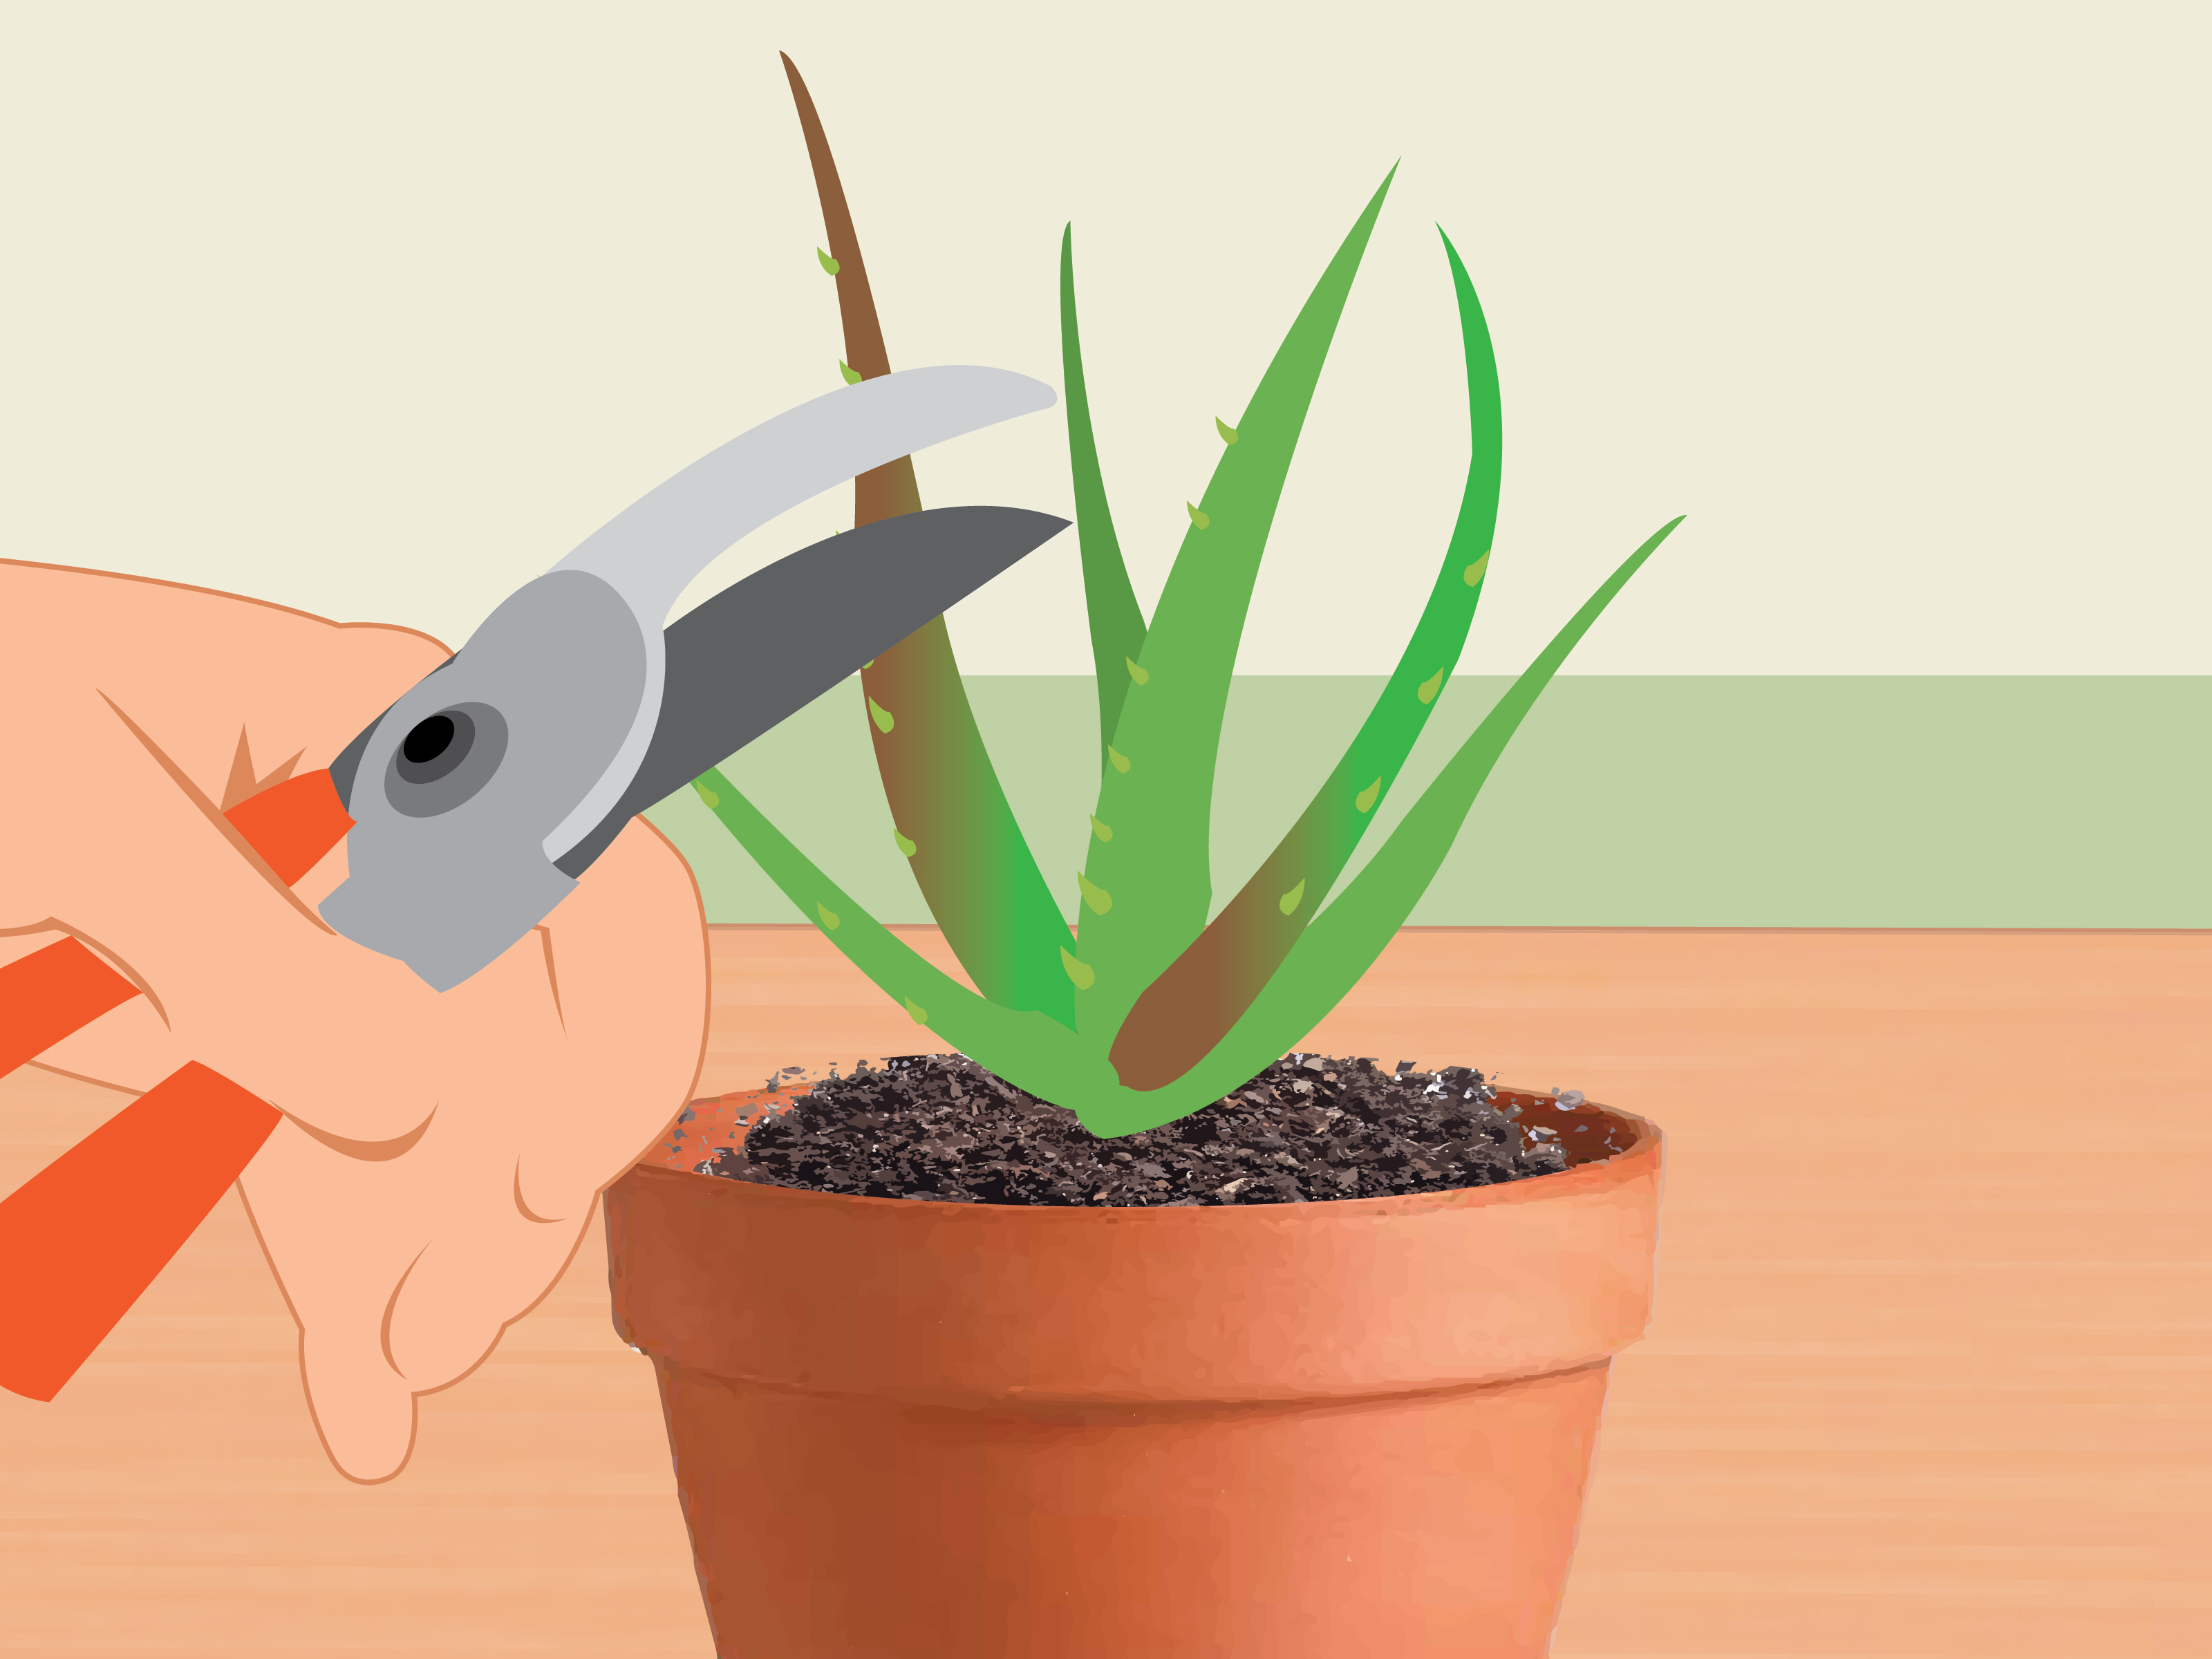 3 Ways to Revive a Dying Aloe Vera Plant - wikiHow